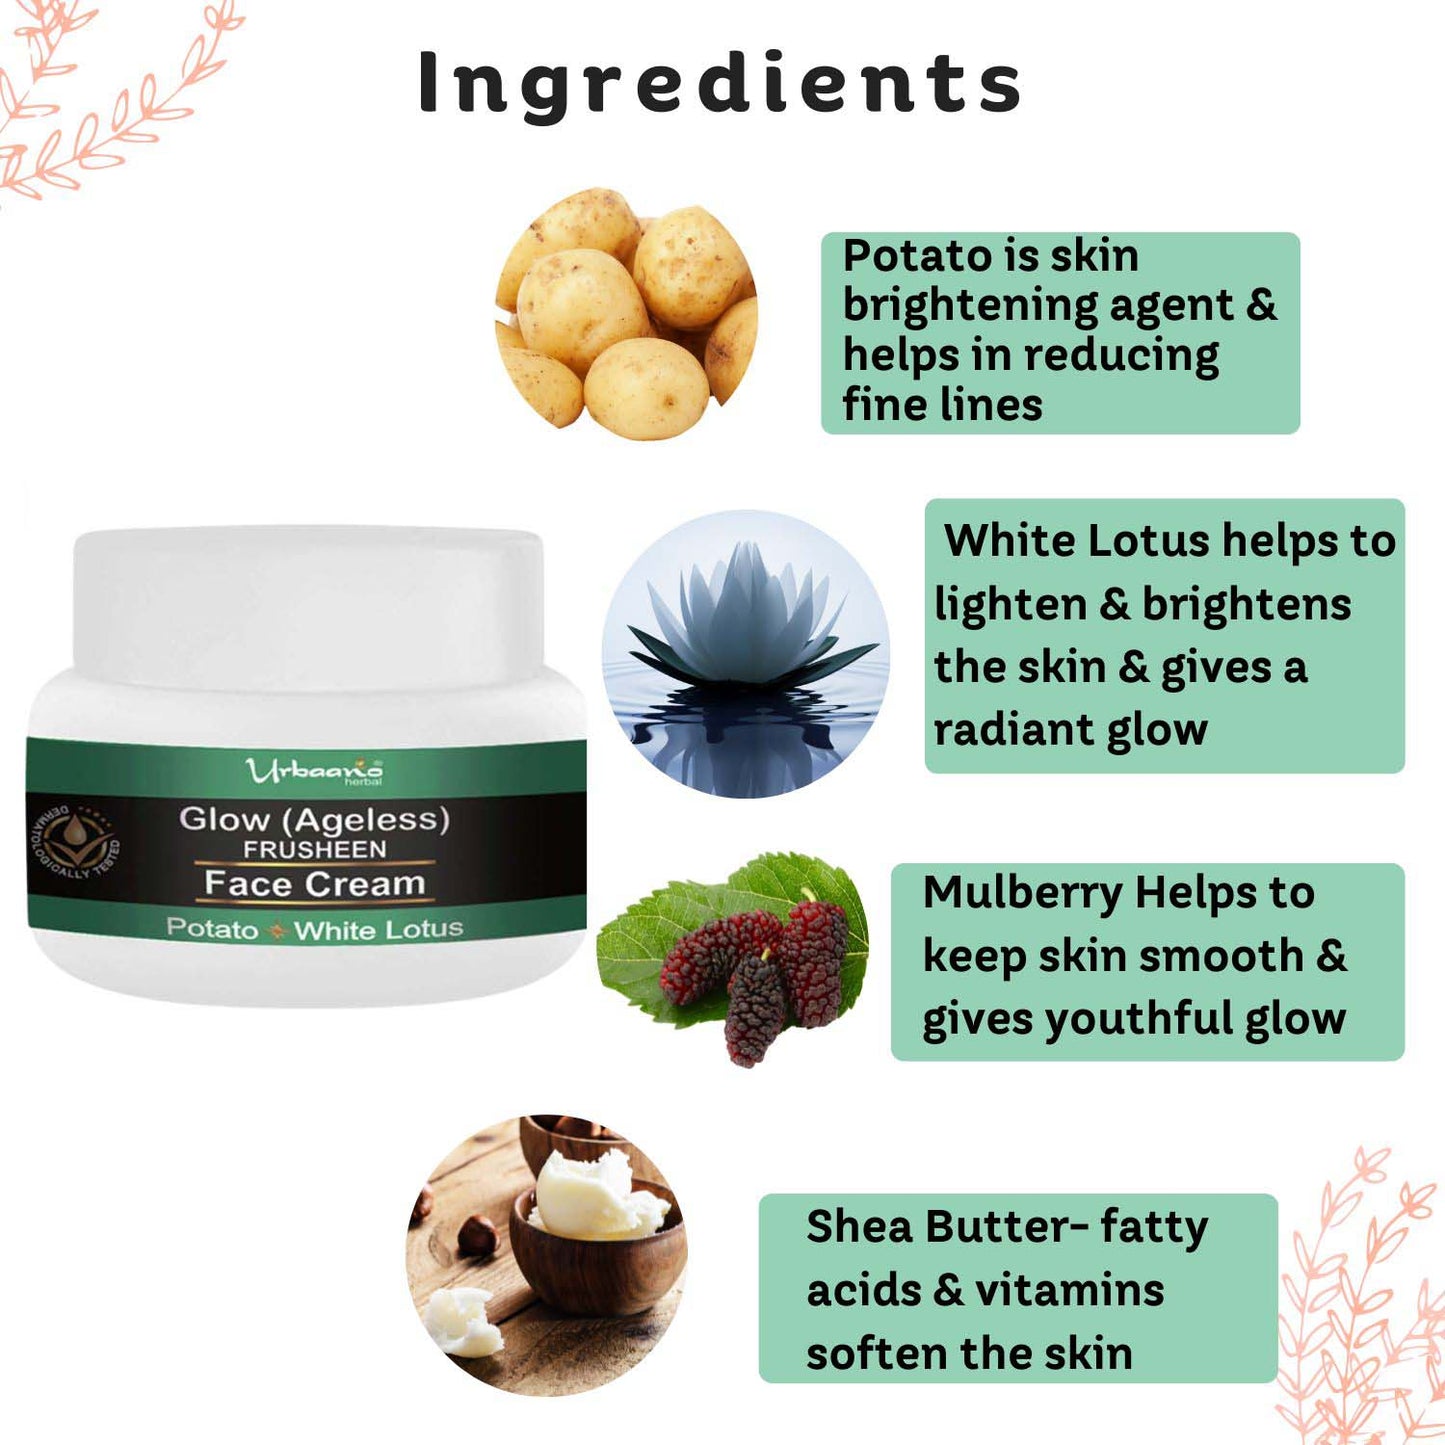 urbaano herbal frusheen glow ageless face cream with mulberry, shea butter, potato, white lotus for supple, bright, hydrated, youthful skin